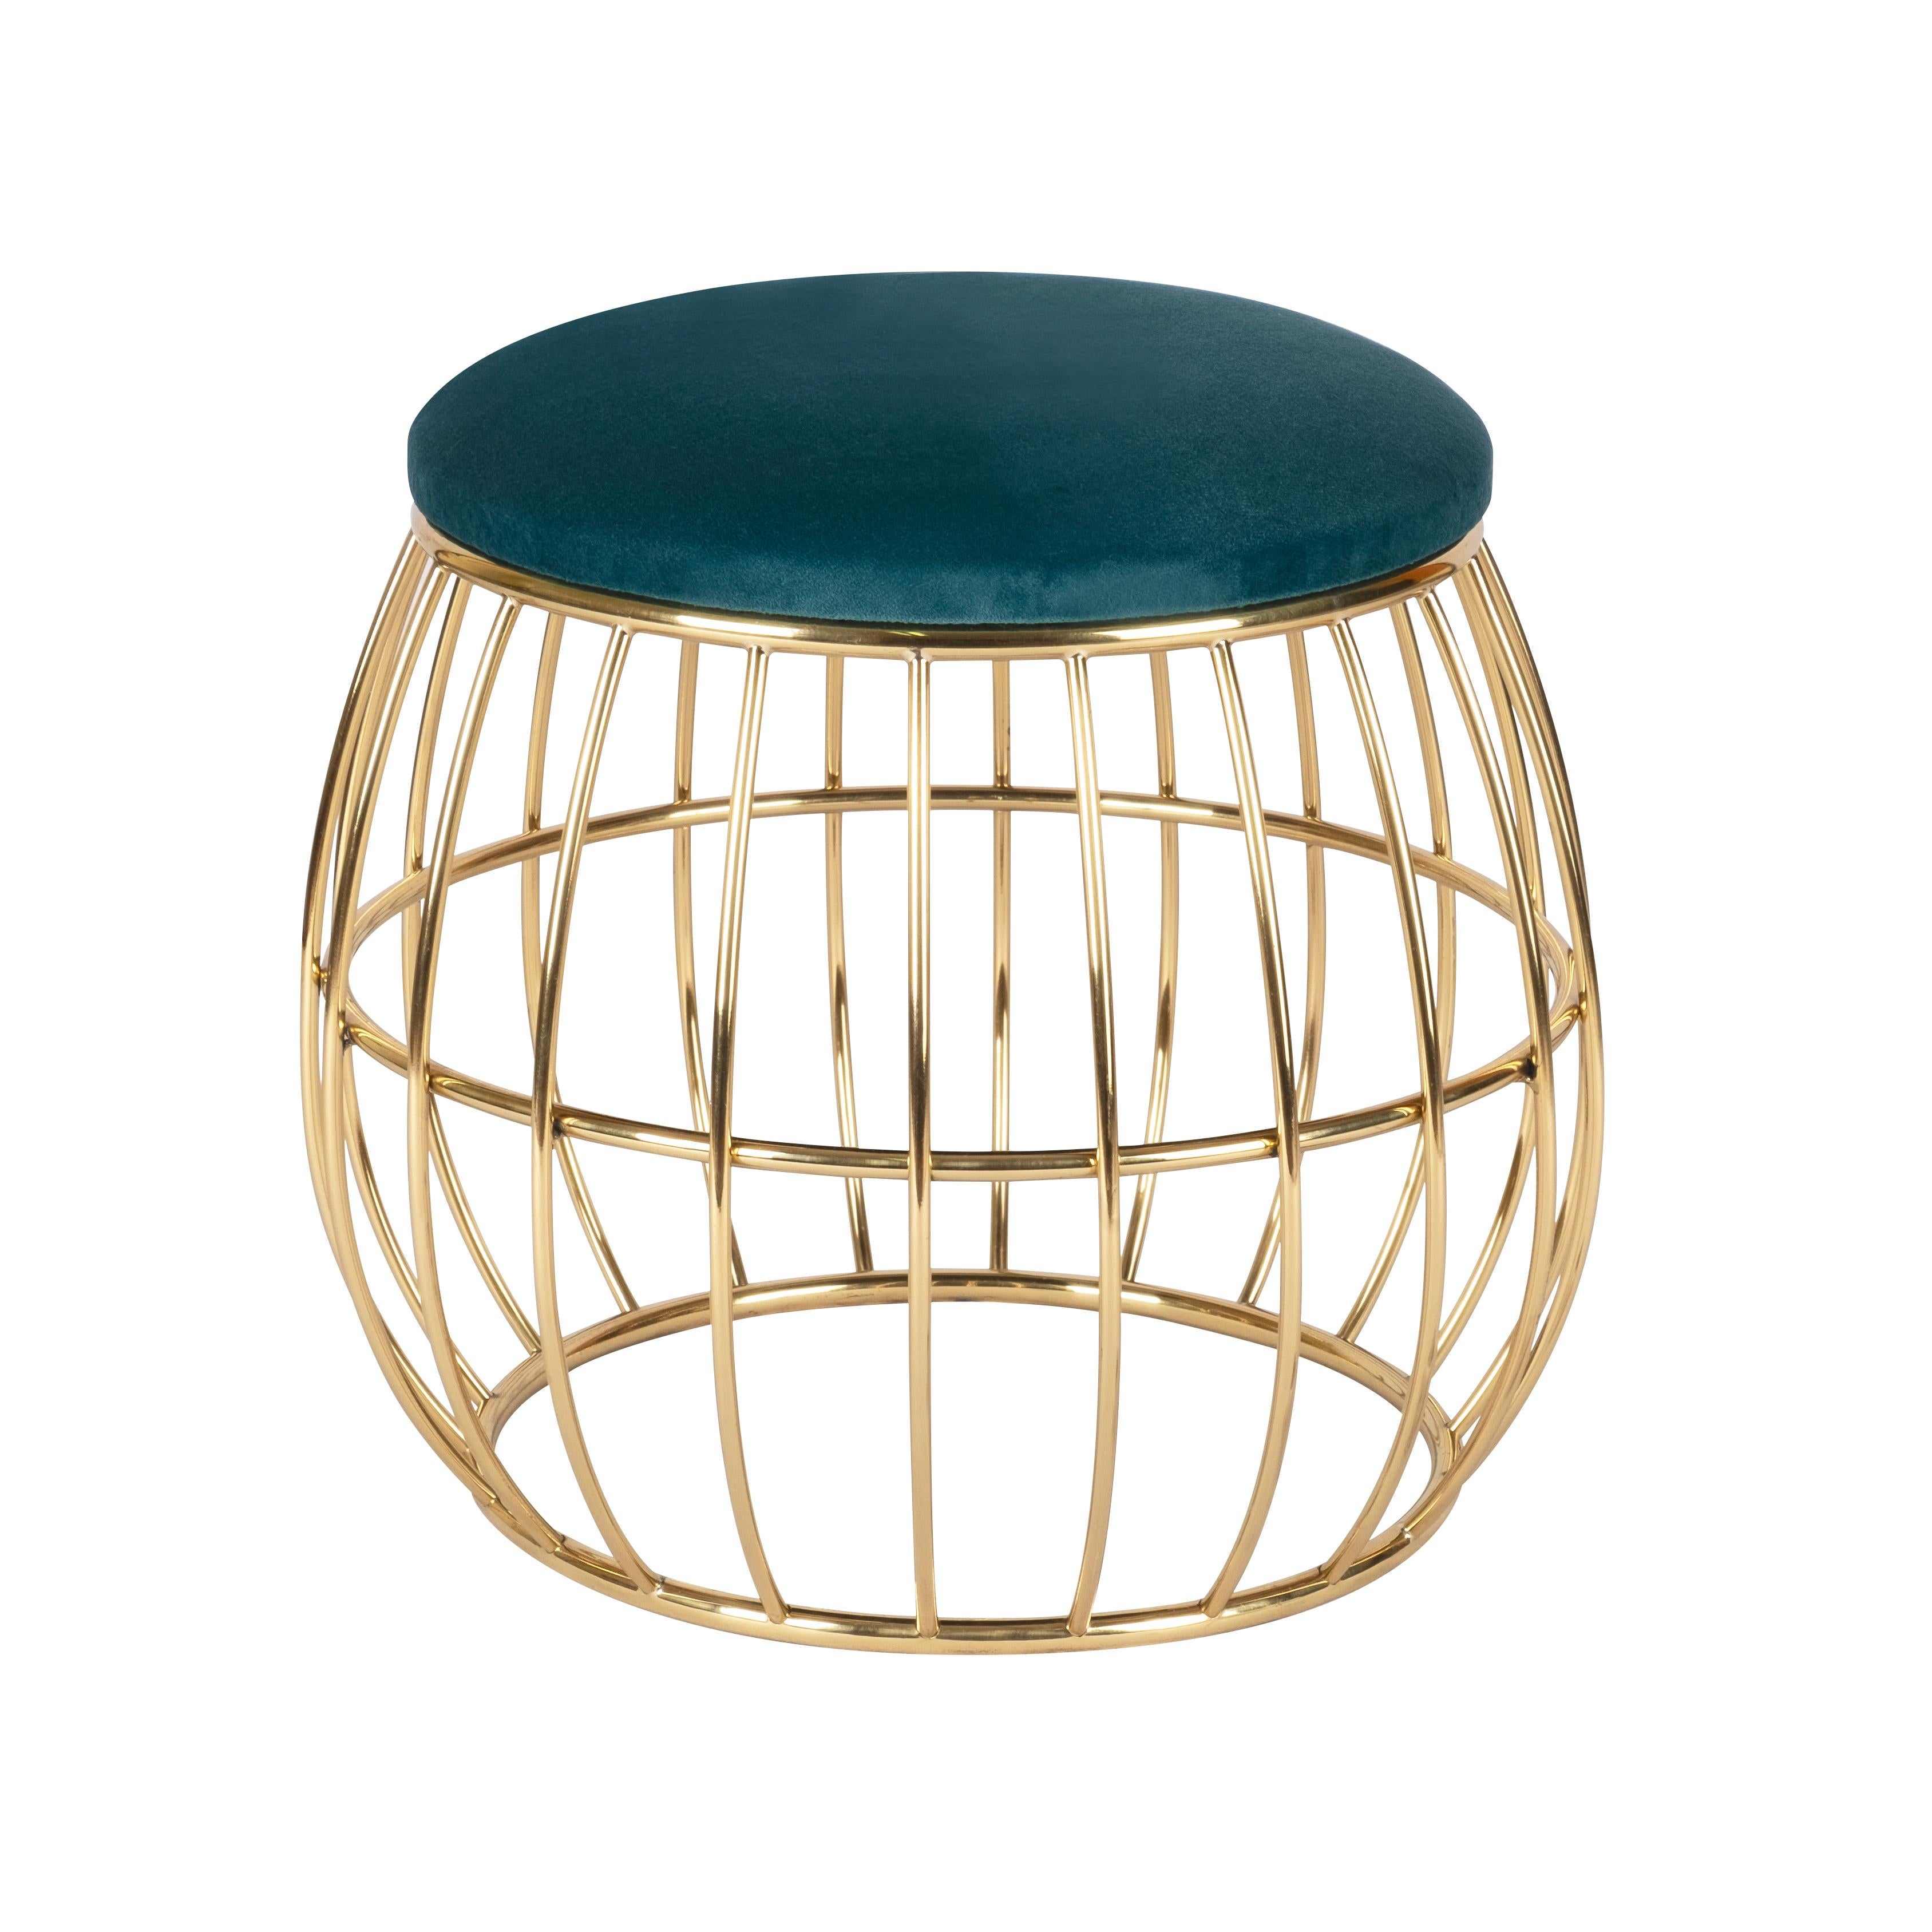 Andy Mid-Century Modern stool is the perfect trendy addition to the coziest corner of your contemporary living space. Inspired by the Andy Warhol that emerged as a significant artist in the New York art scene in the 1960s, he was one of the most